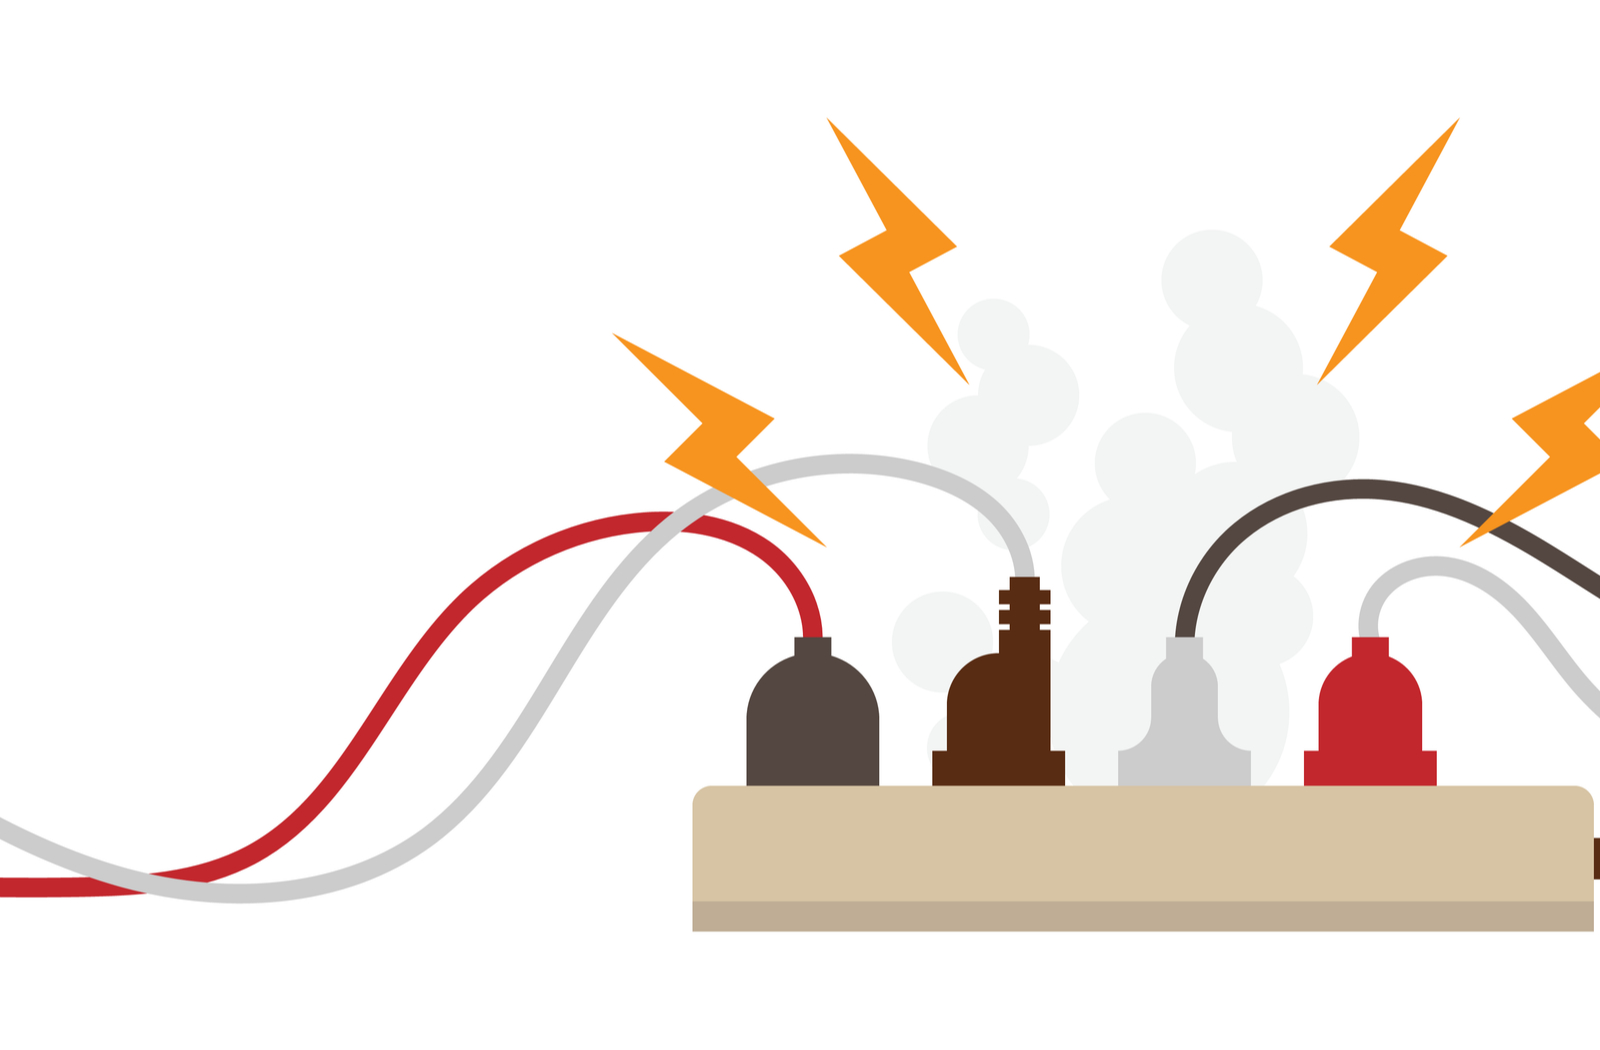 Illustration showing overload of electric circuit with fire and smoke coming from outlets